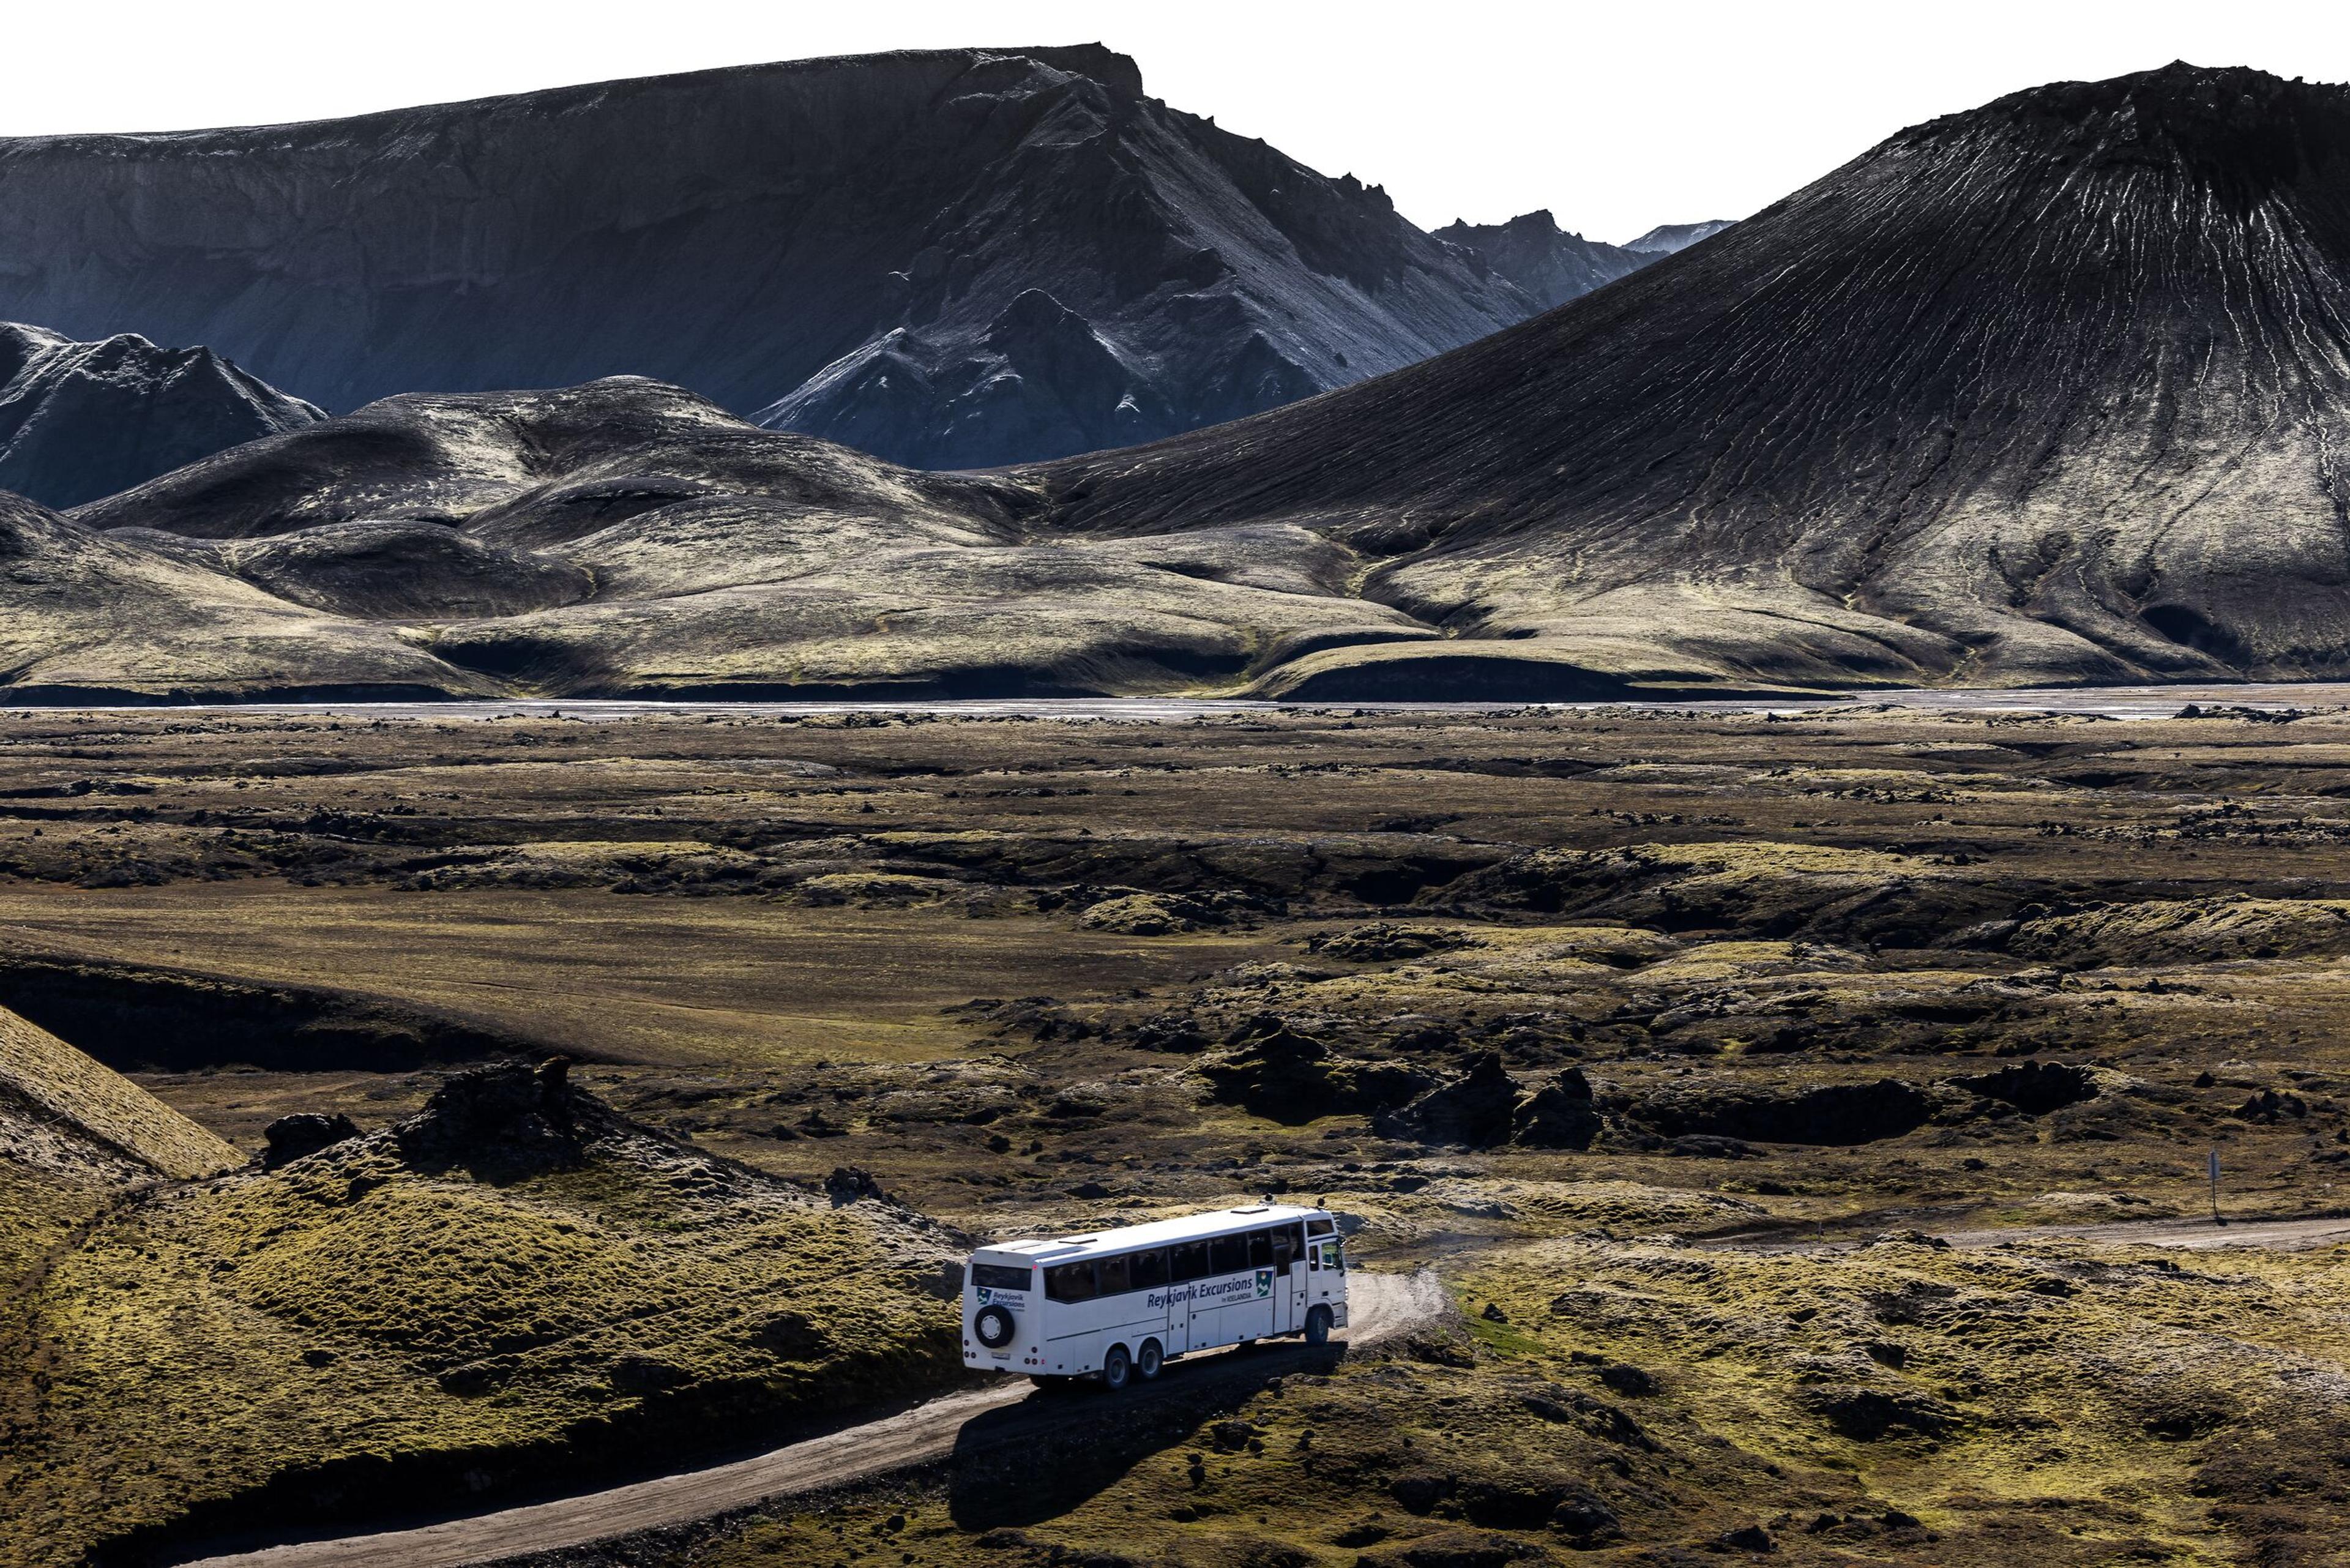 The Highland Bus driving through a valley in Iceland.